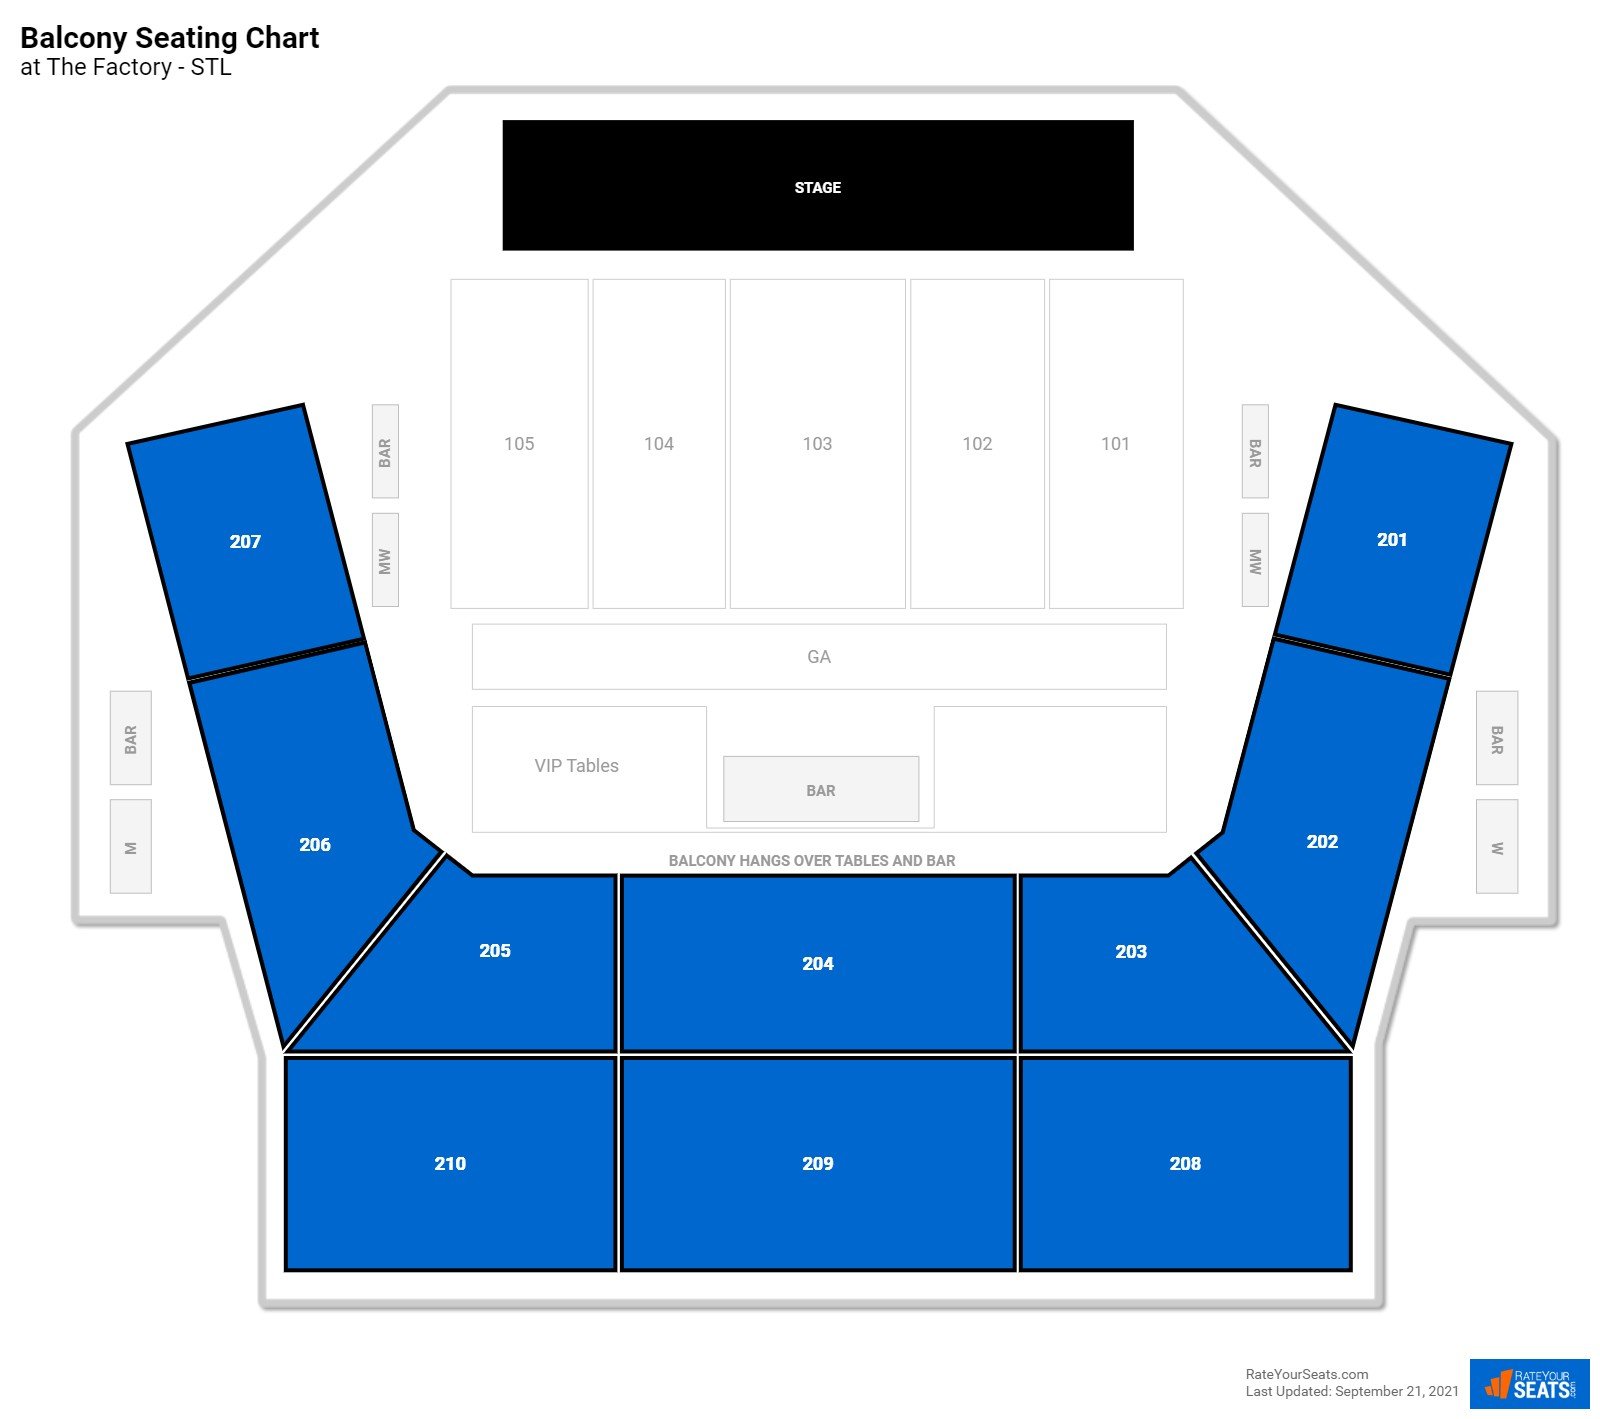 Concert Balcony Seating Chart at The Factory - STL